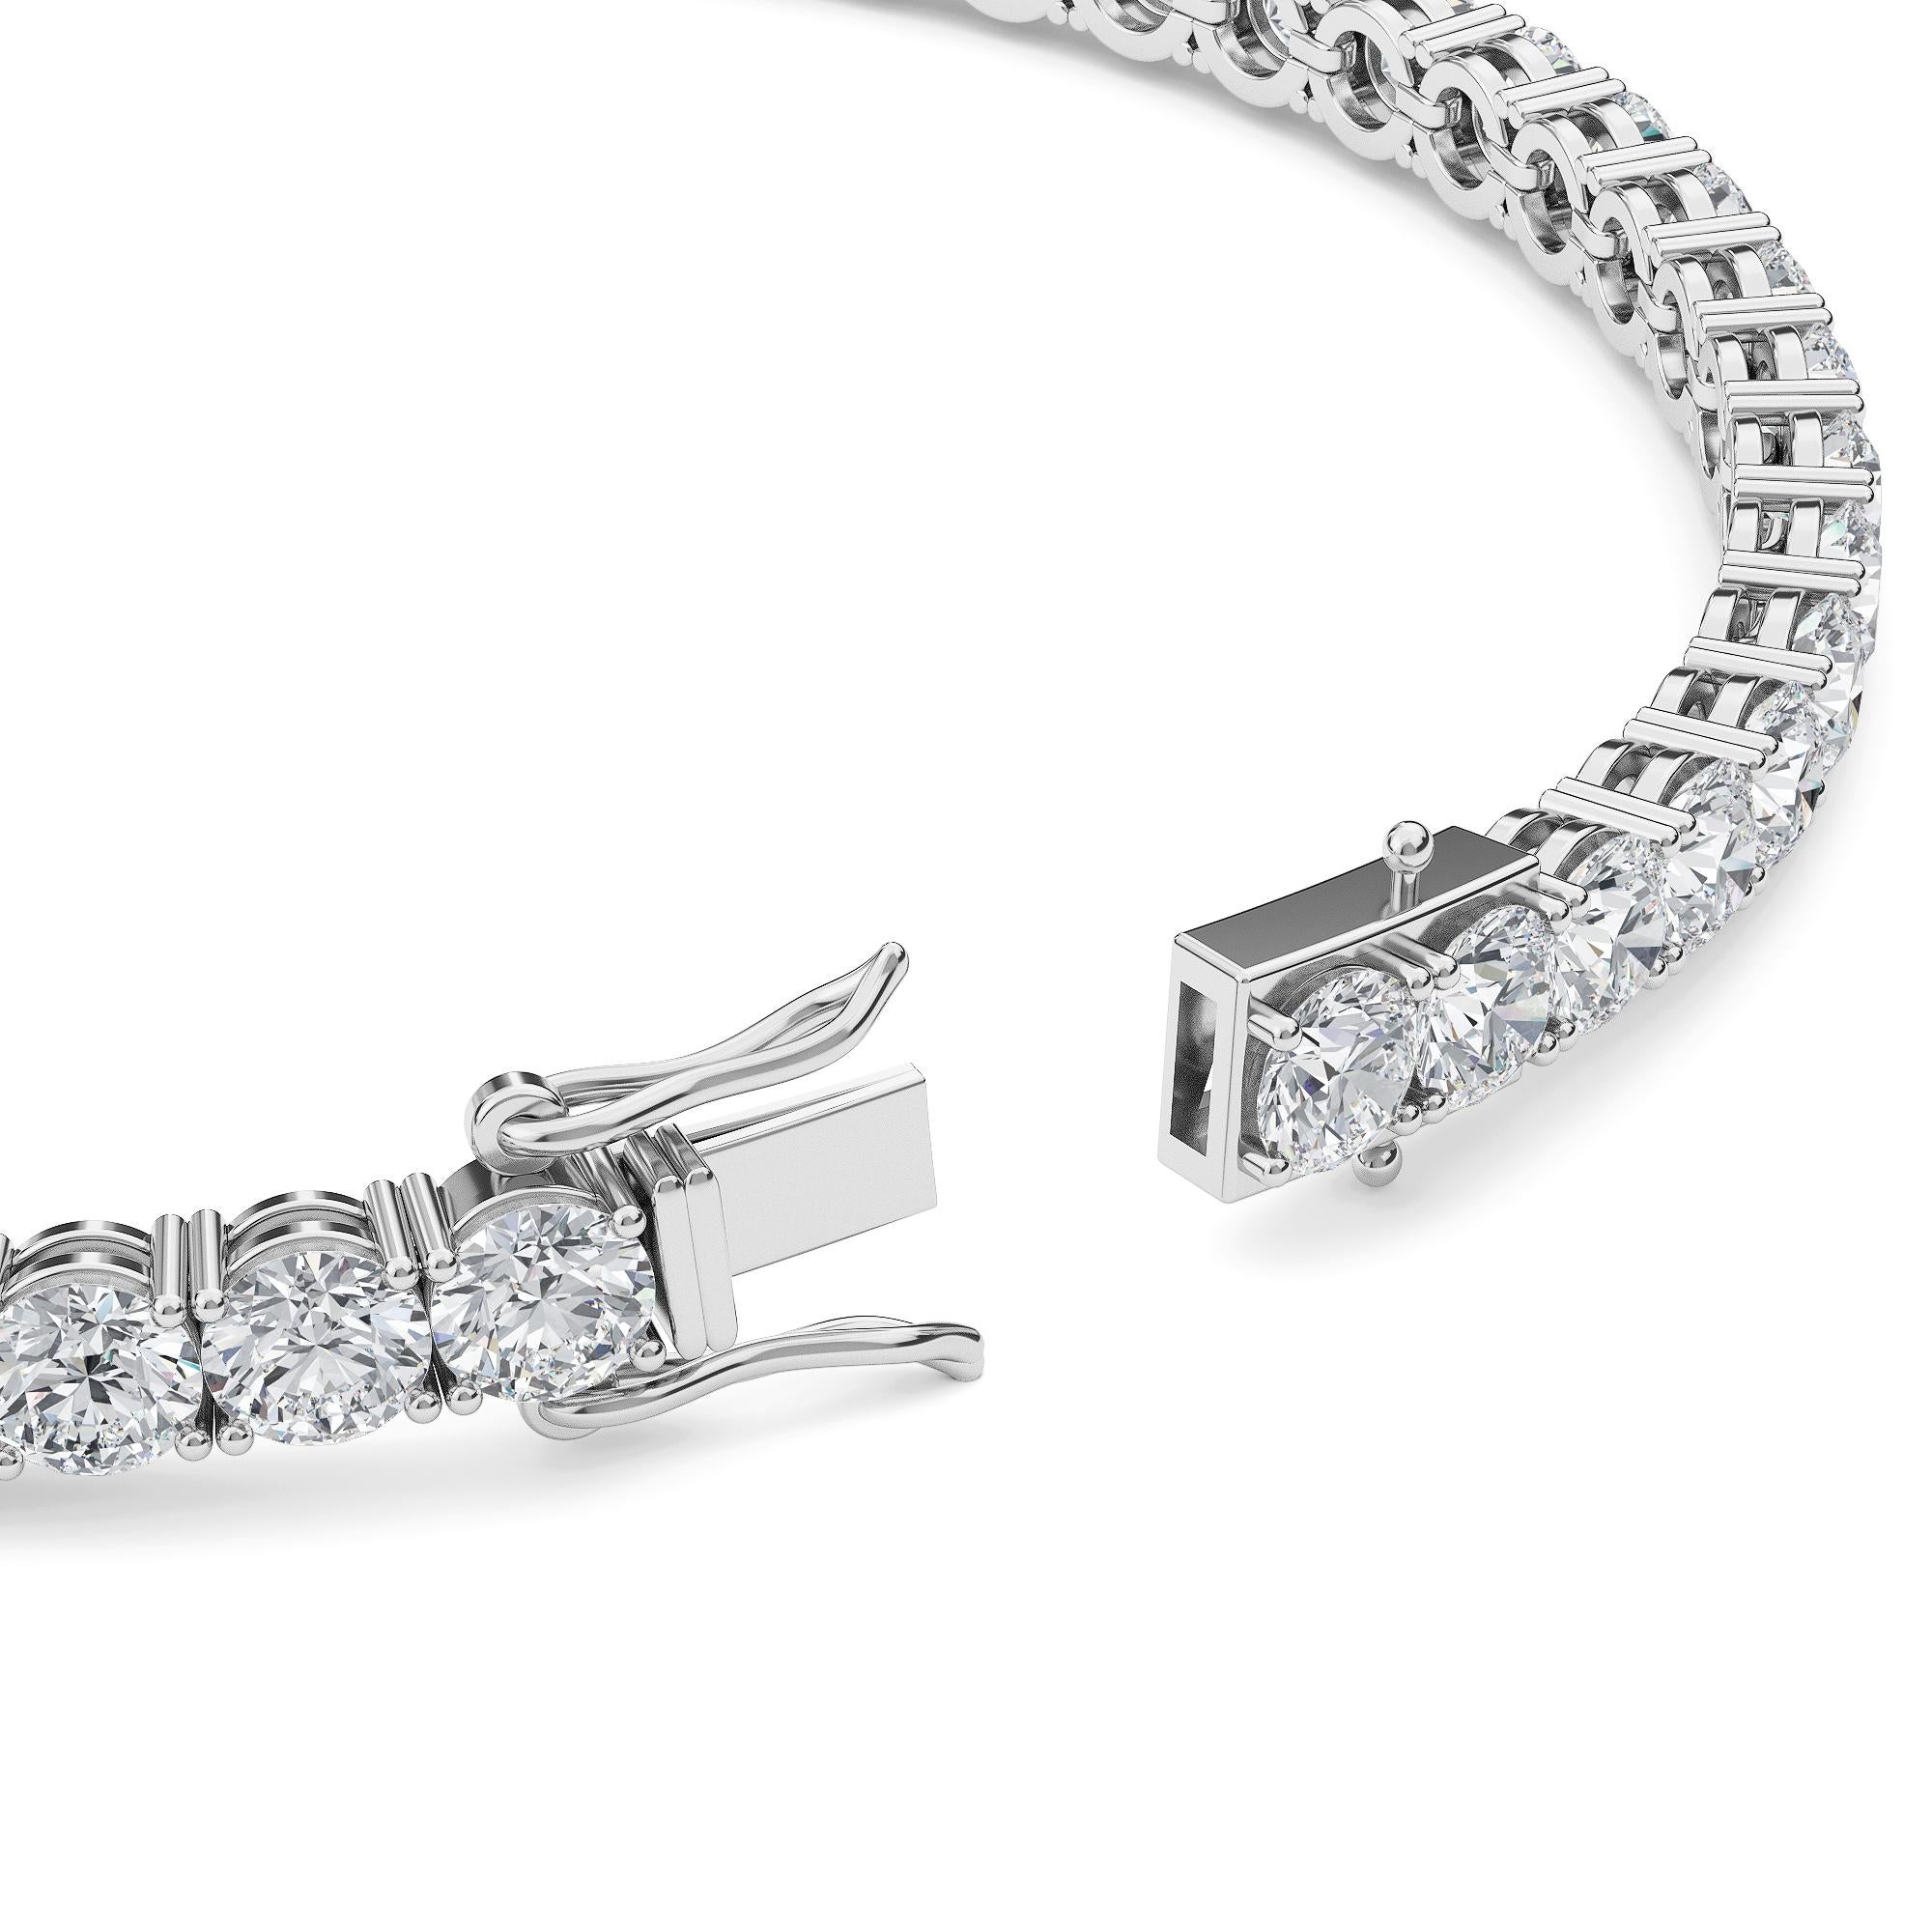 Make your outfit sparkle with this tennis bracelets features beautifully matched round natural diamonds. Elegance for every moment. 

METAL DETAILS: 18K Gold
DIAMOND DETAILS: Natural, Ethically sourced &, Conflict free.
DIAMOND SHAPES : 